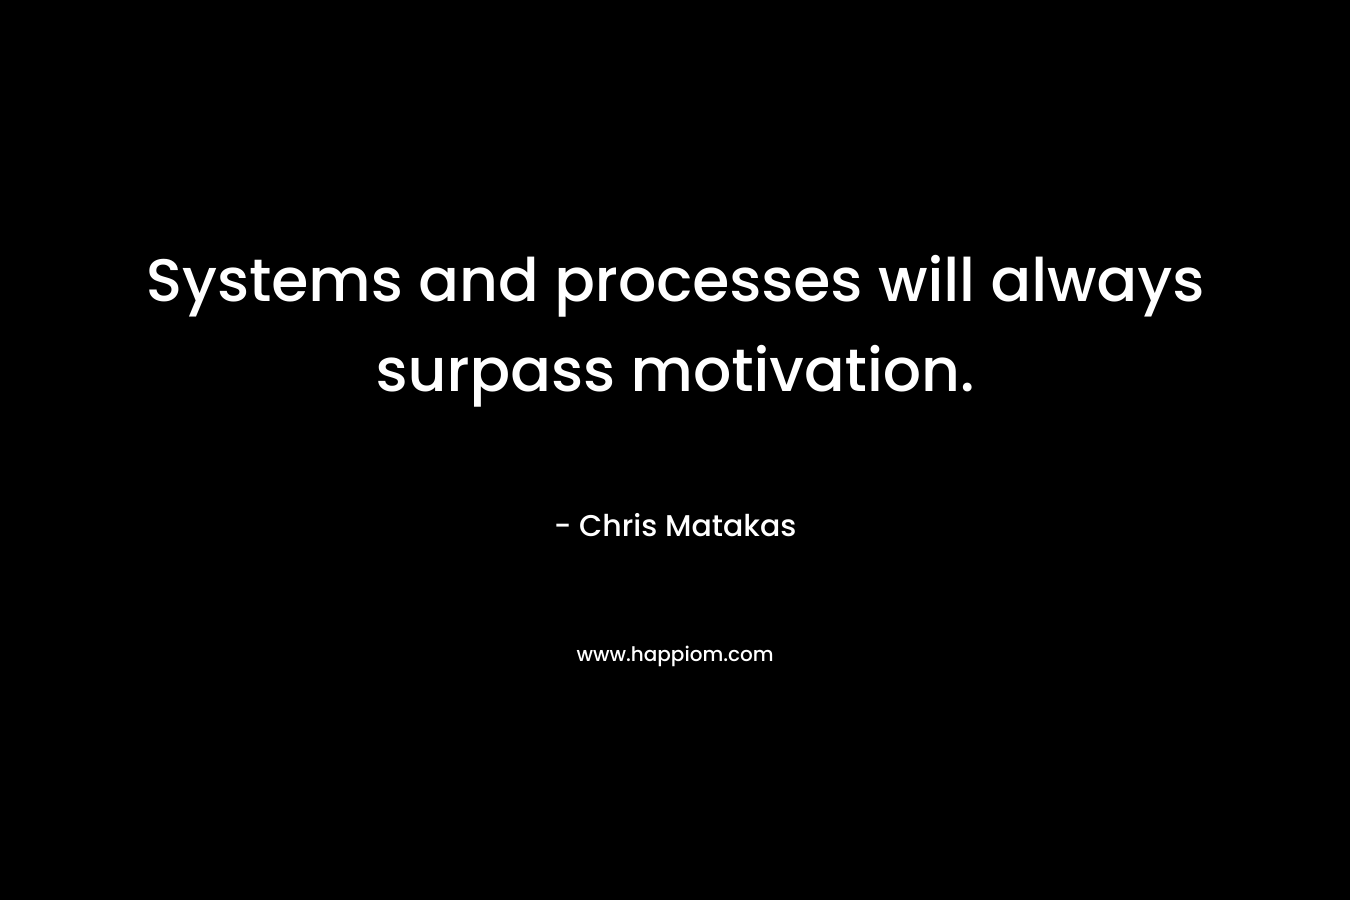 Systems and processes will always surpass motivation.